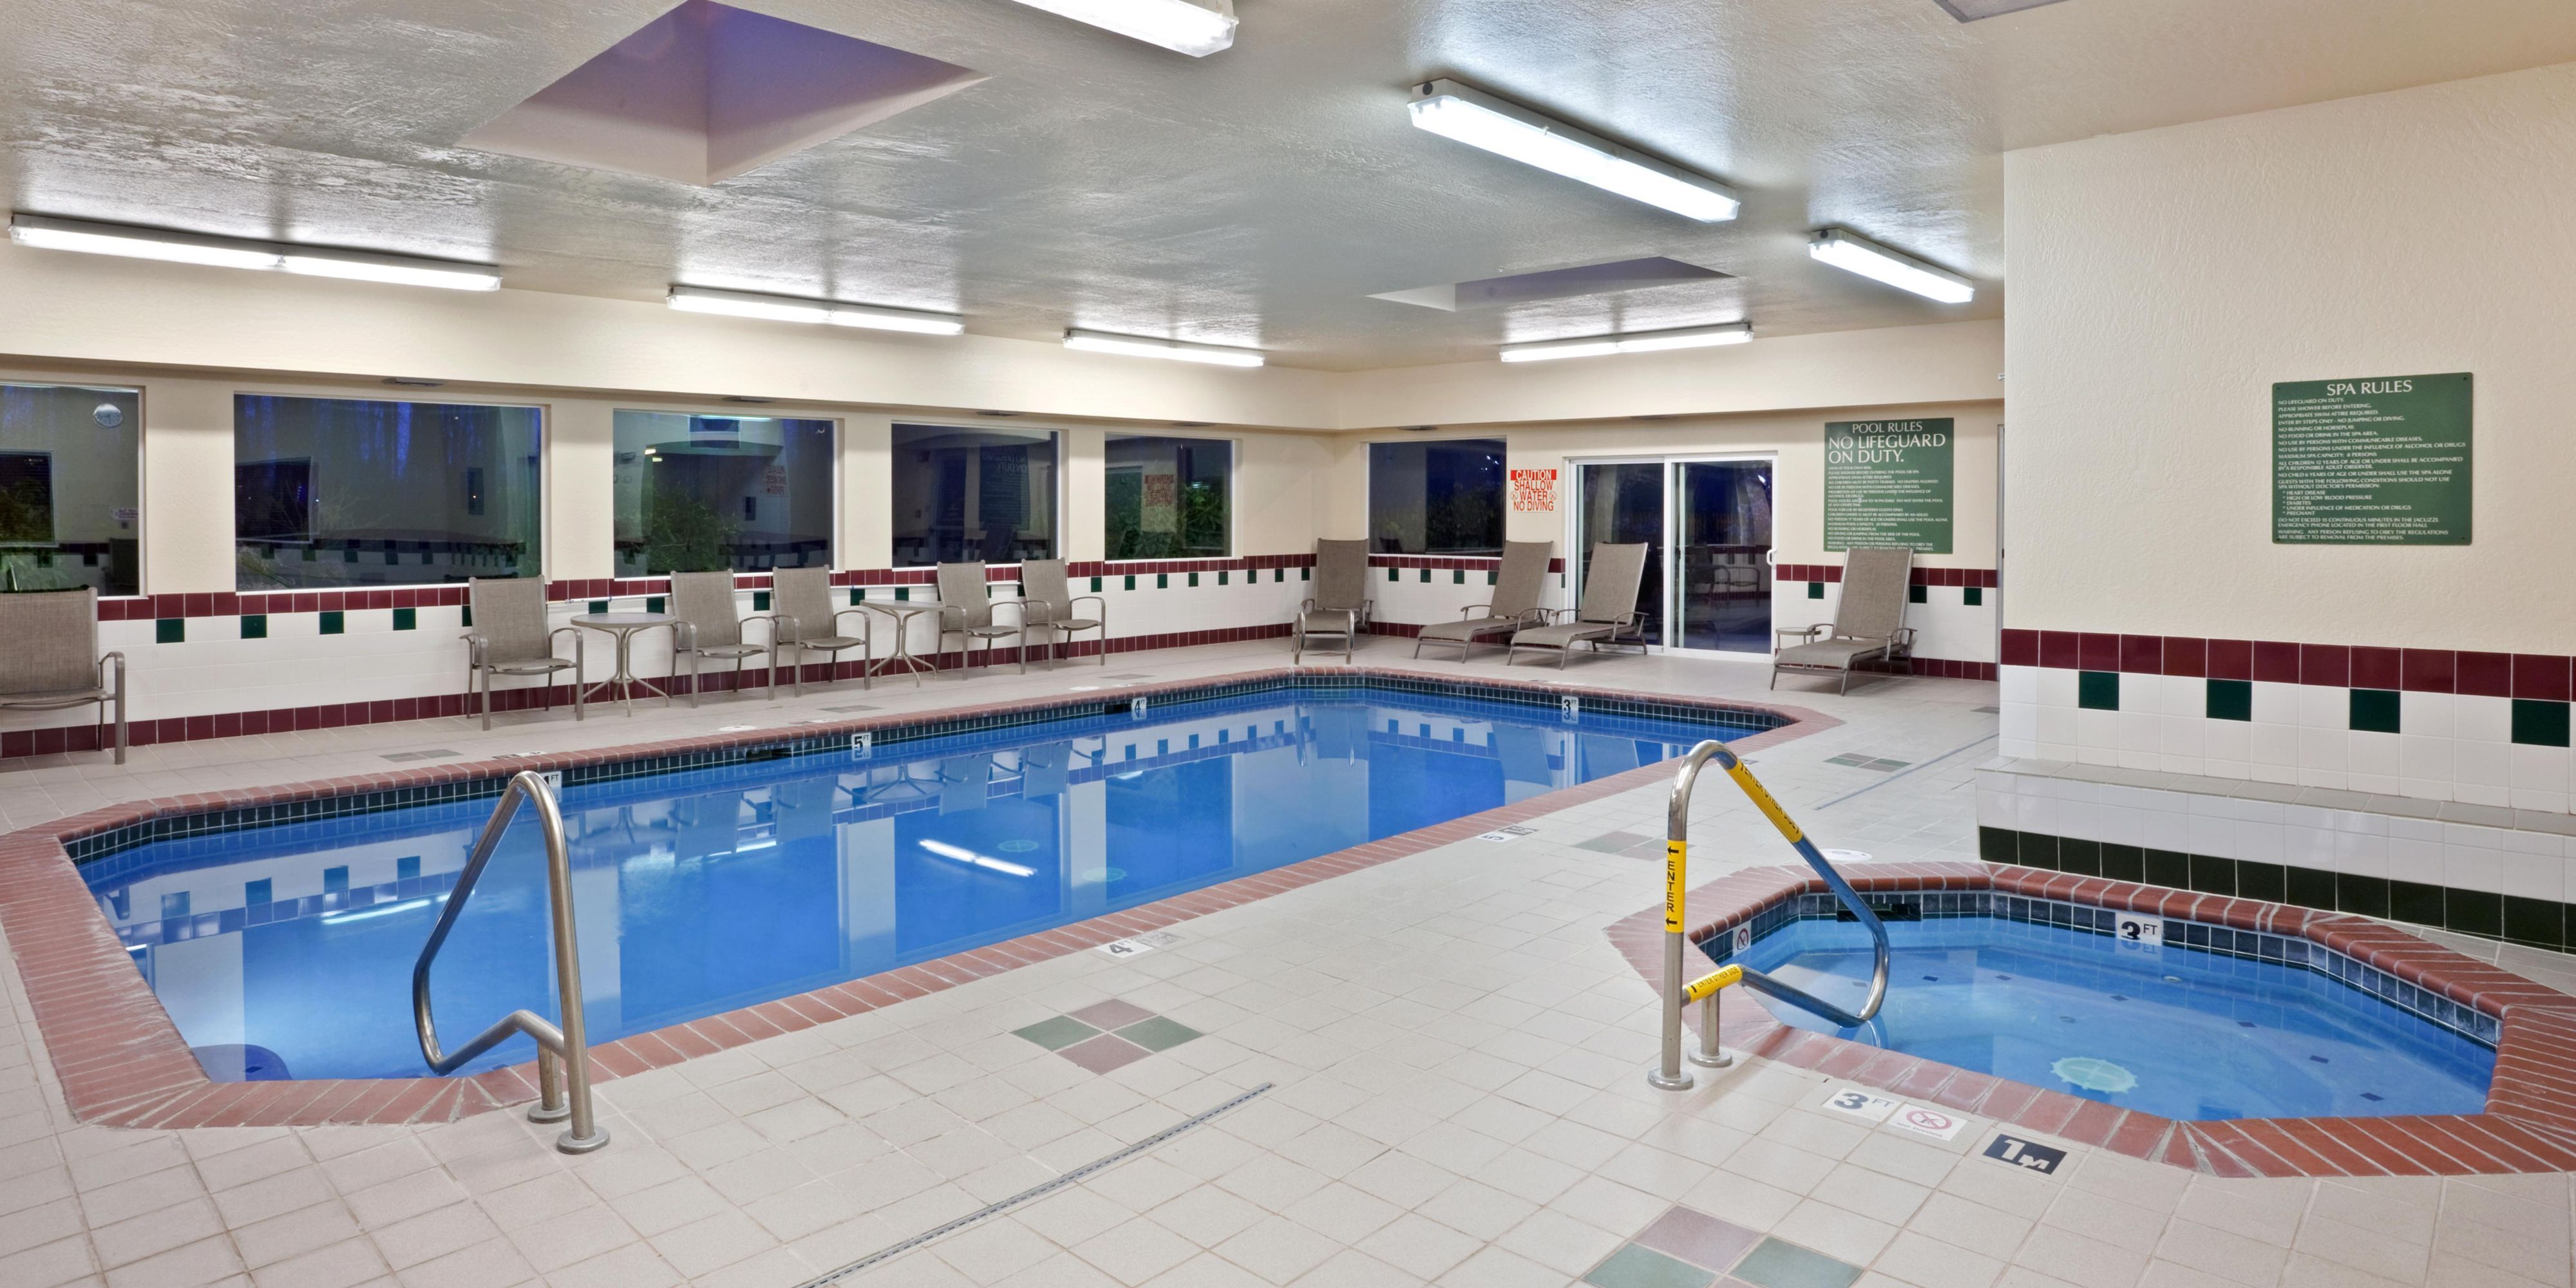 **Currently Closed due to Covid 19 Restrictions **
Complete your trip with a dip in our indoor heated pool and whirlpool! Our pool operates 365 days a year, and is open daily from 6:00am until 10:00pm. Fresh towels await you at the pool. 